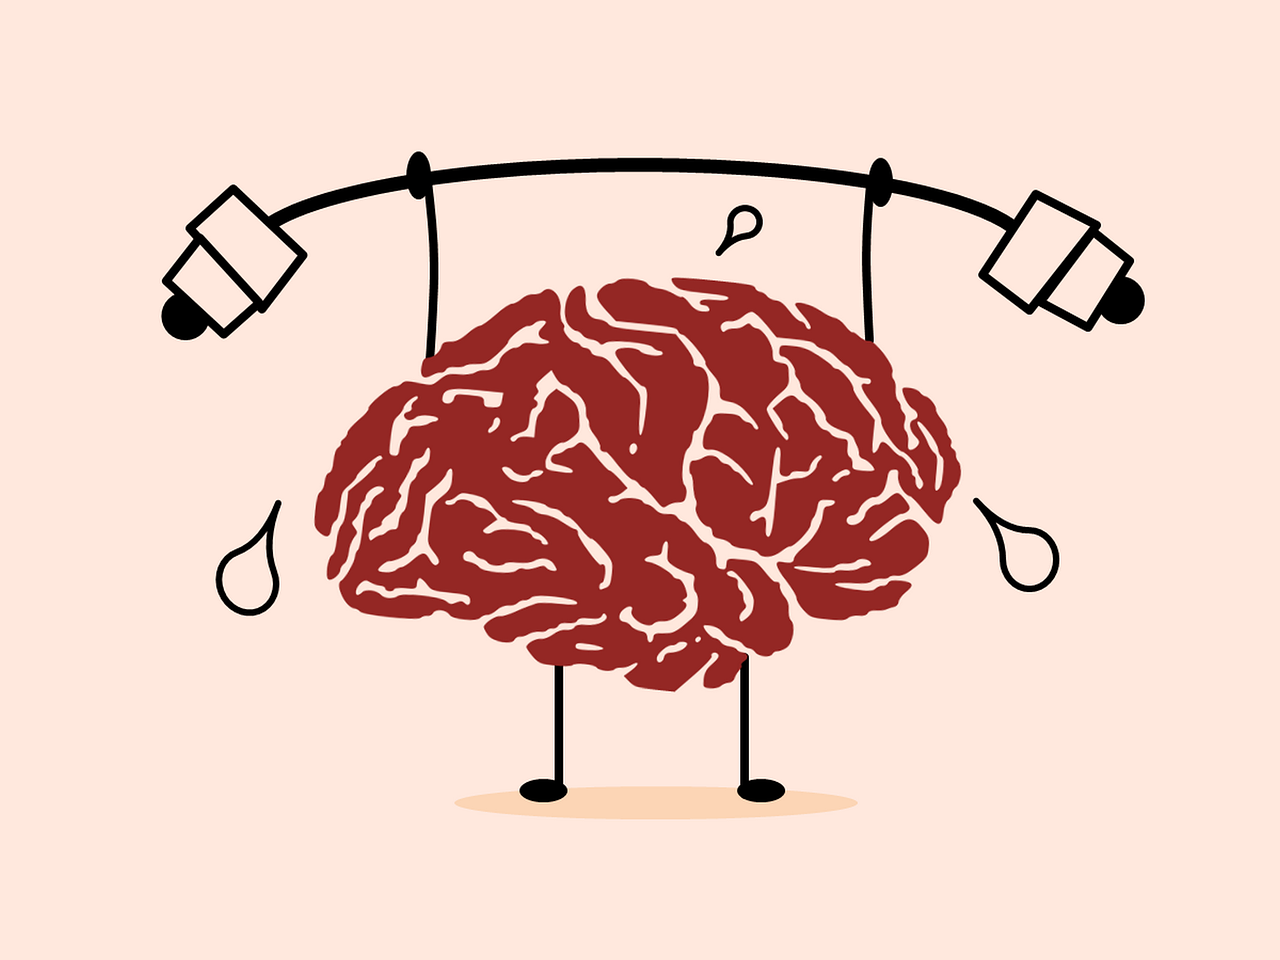 Boost your brain power through exercise